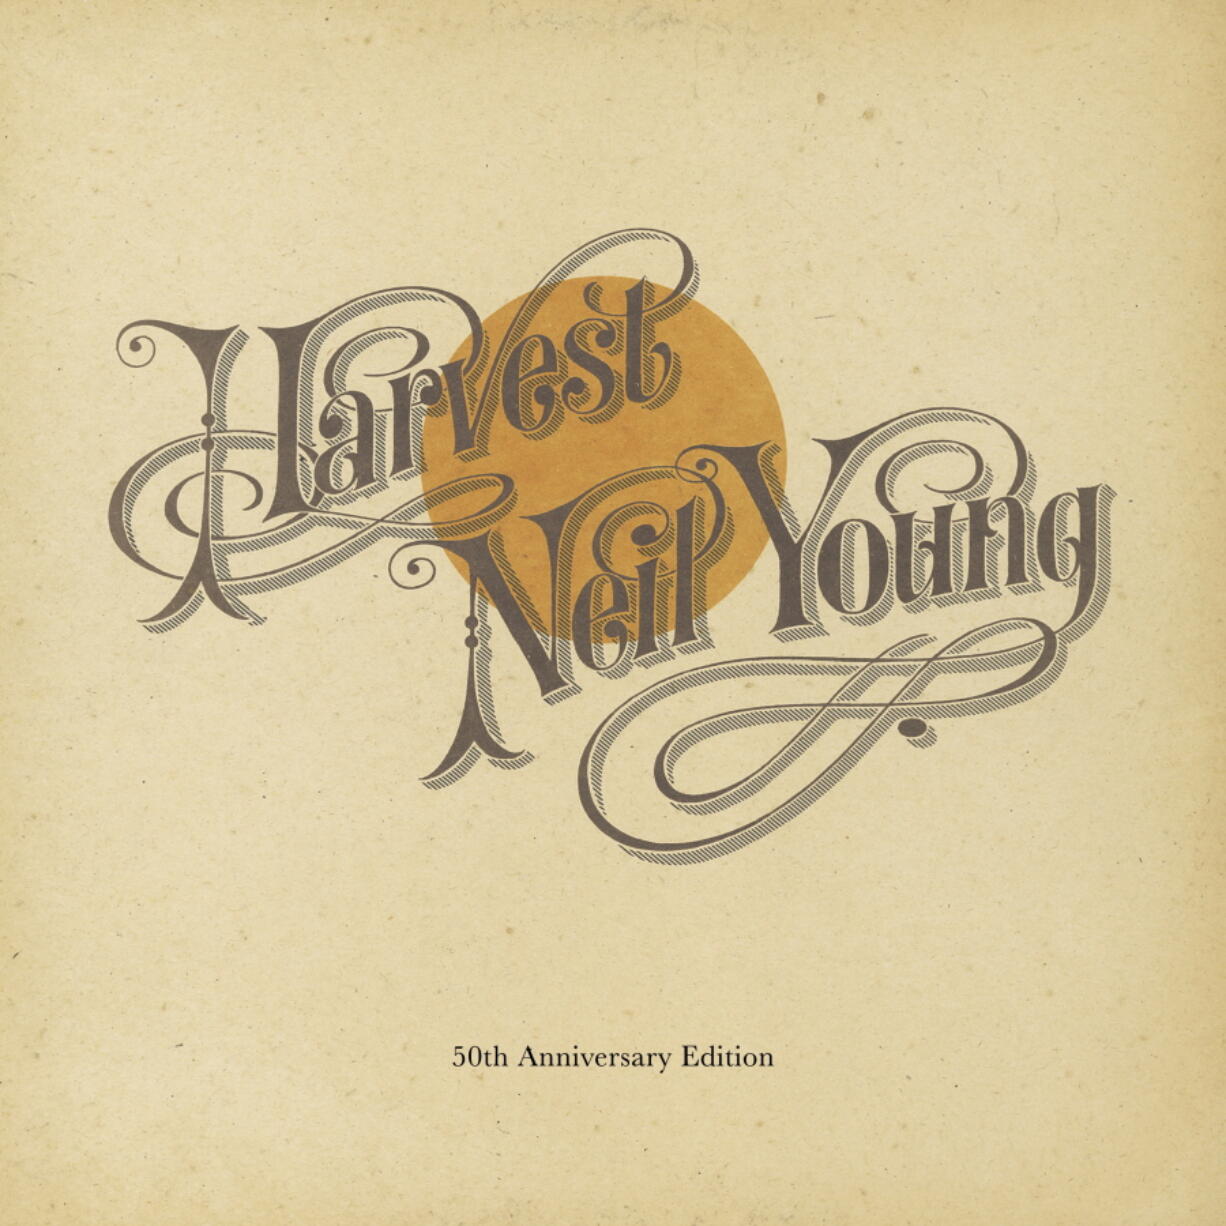 The 50th anniversary edition of "Harvest" by Neil Young.